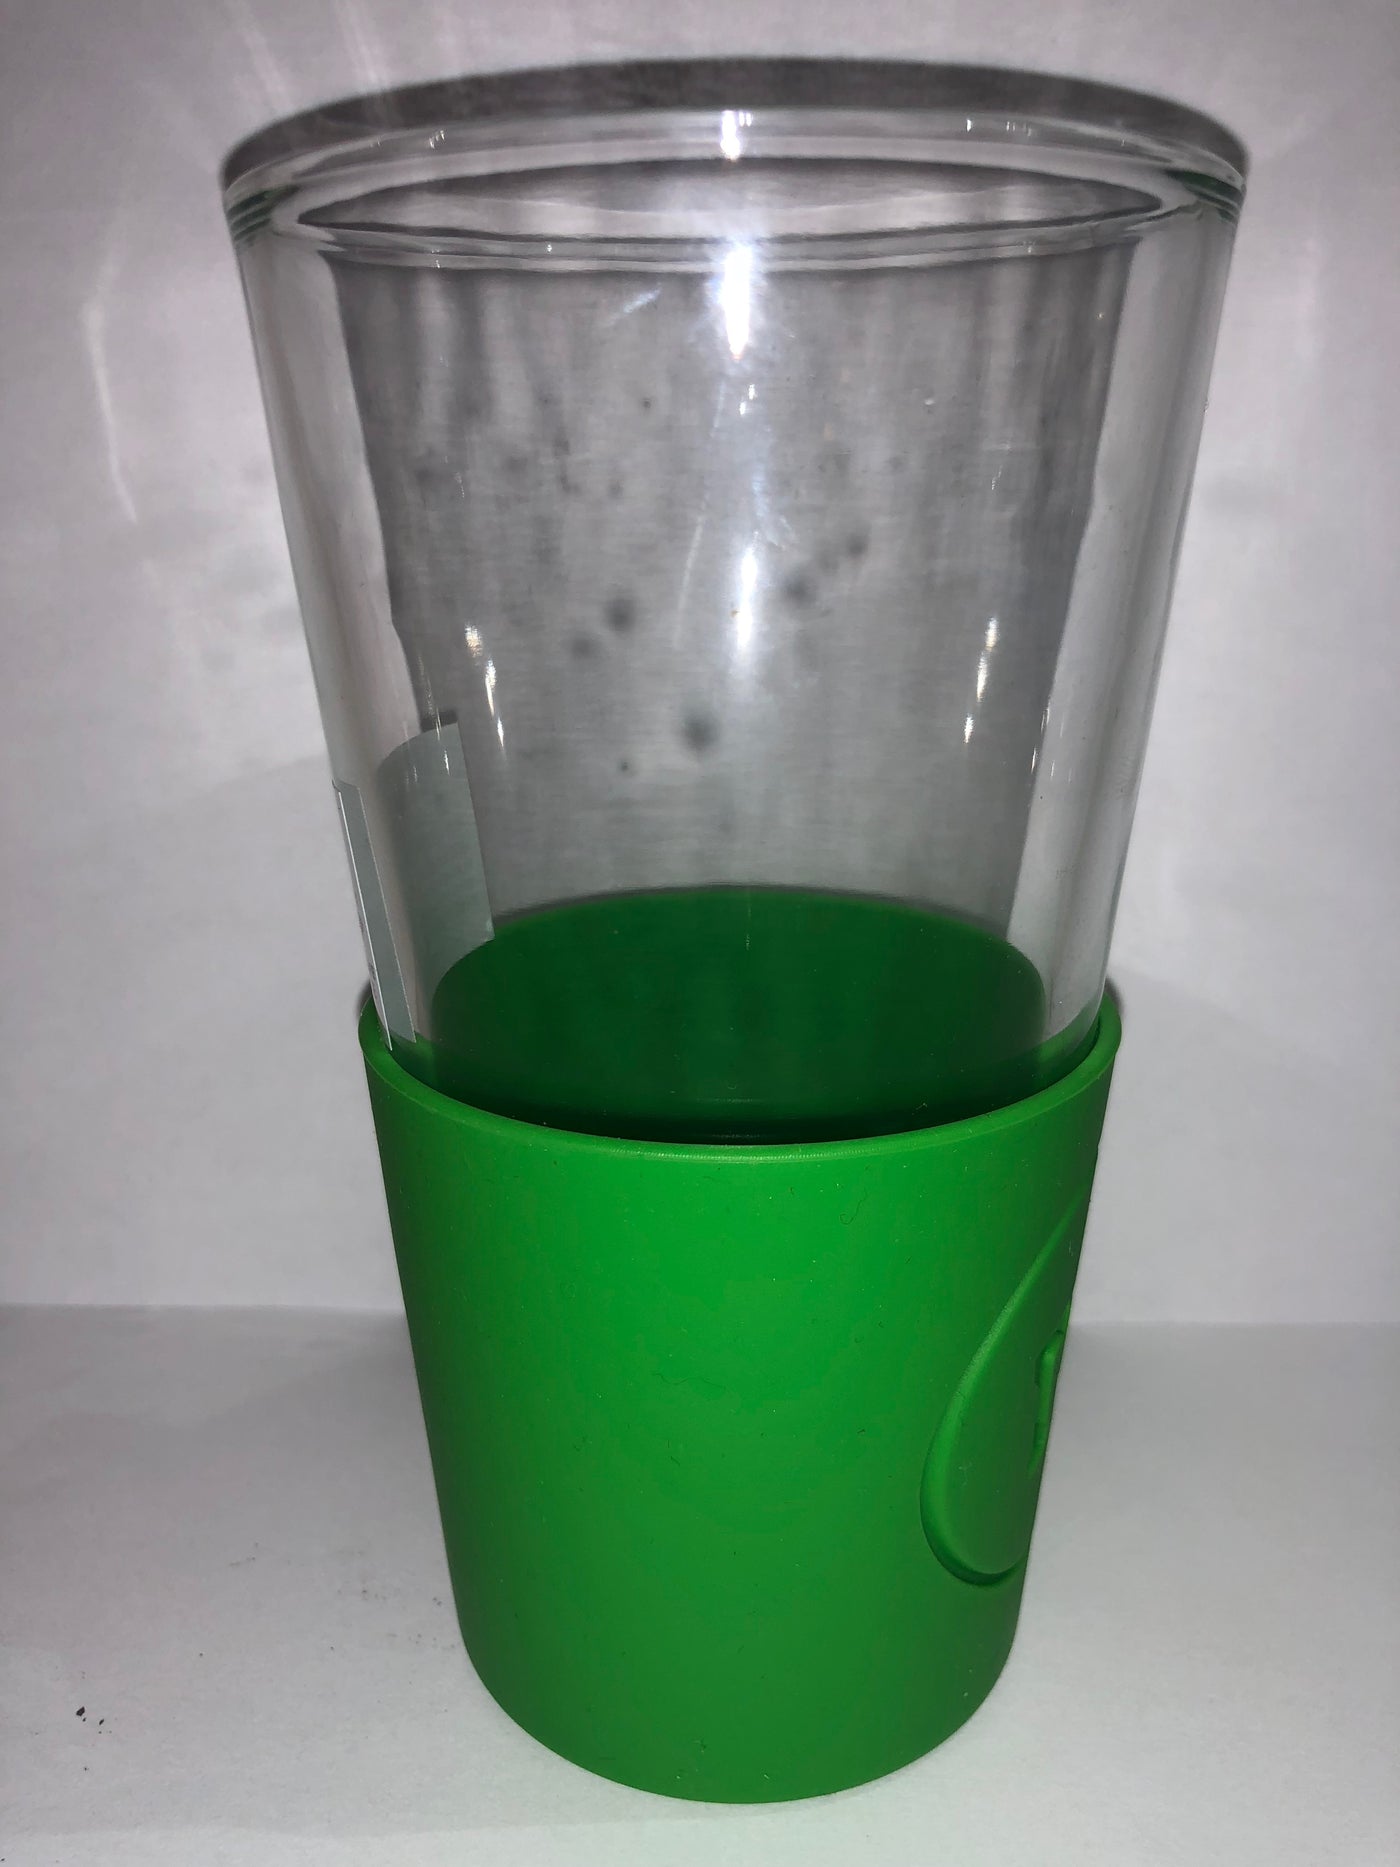 M&M's World Green Silicone Sleeve Pint Glass New